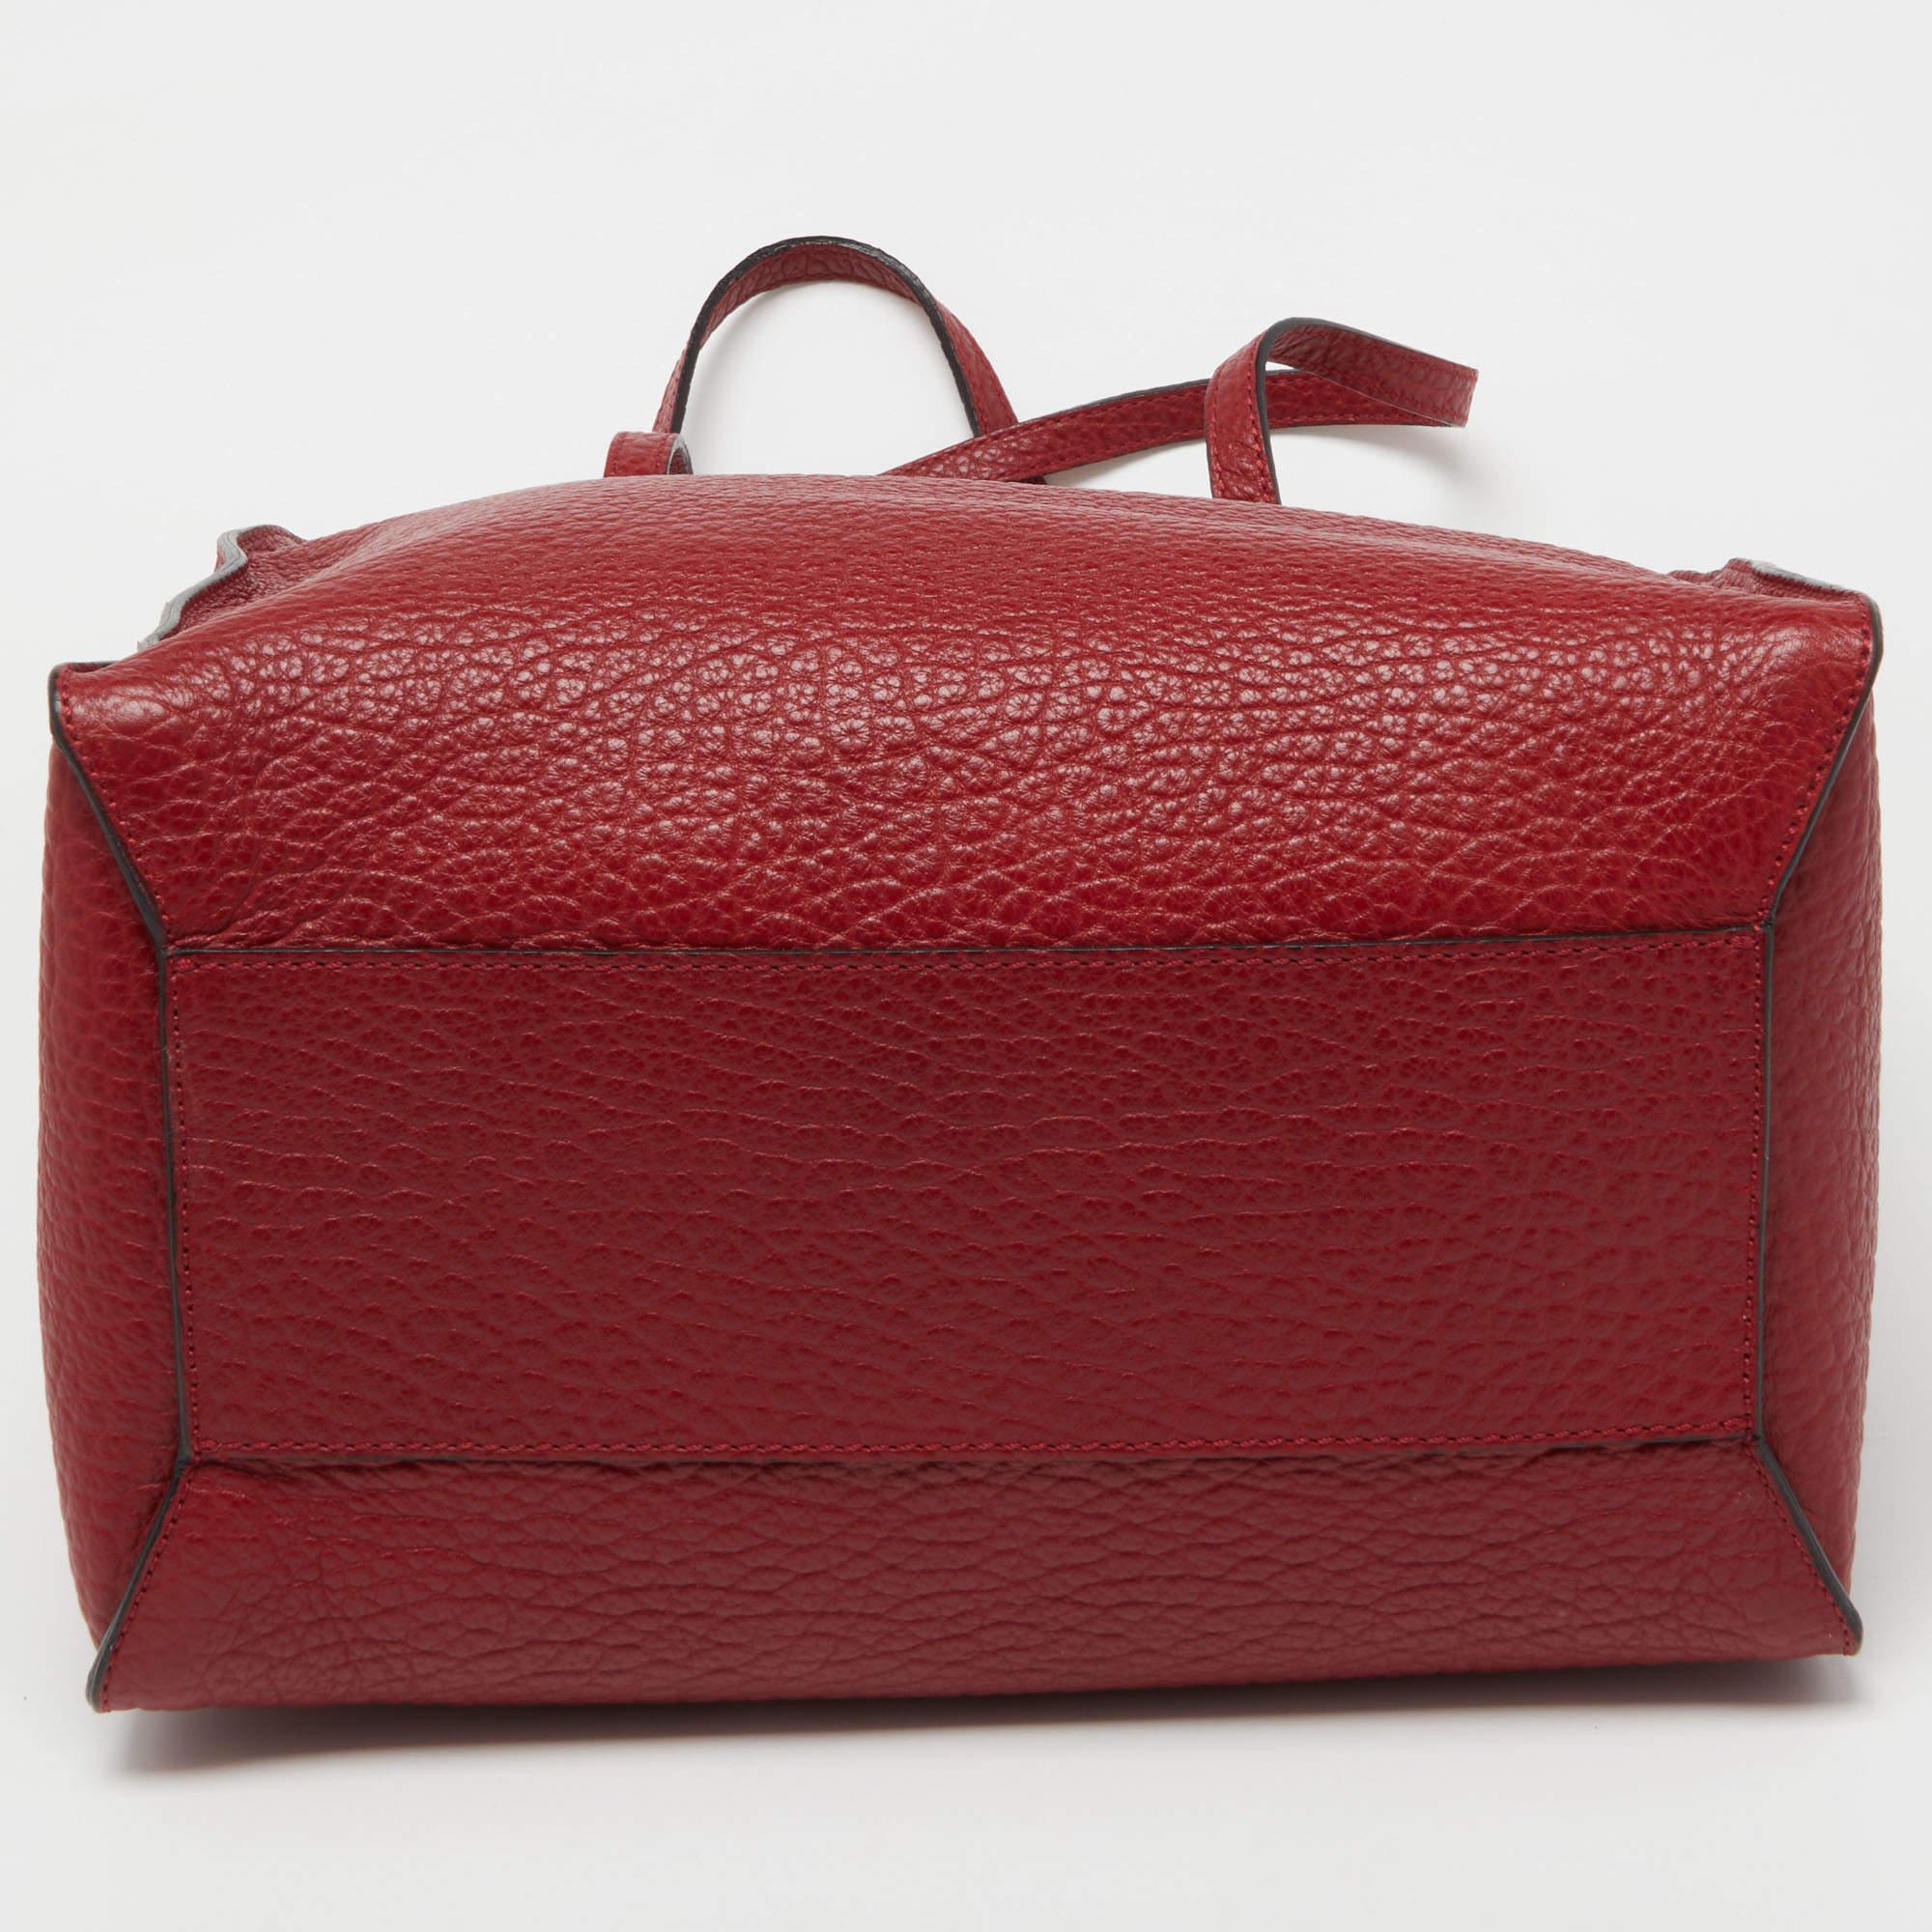 Burberry Red Grain Leather Woodbury Tote For Sale 1